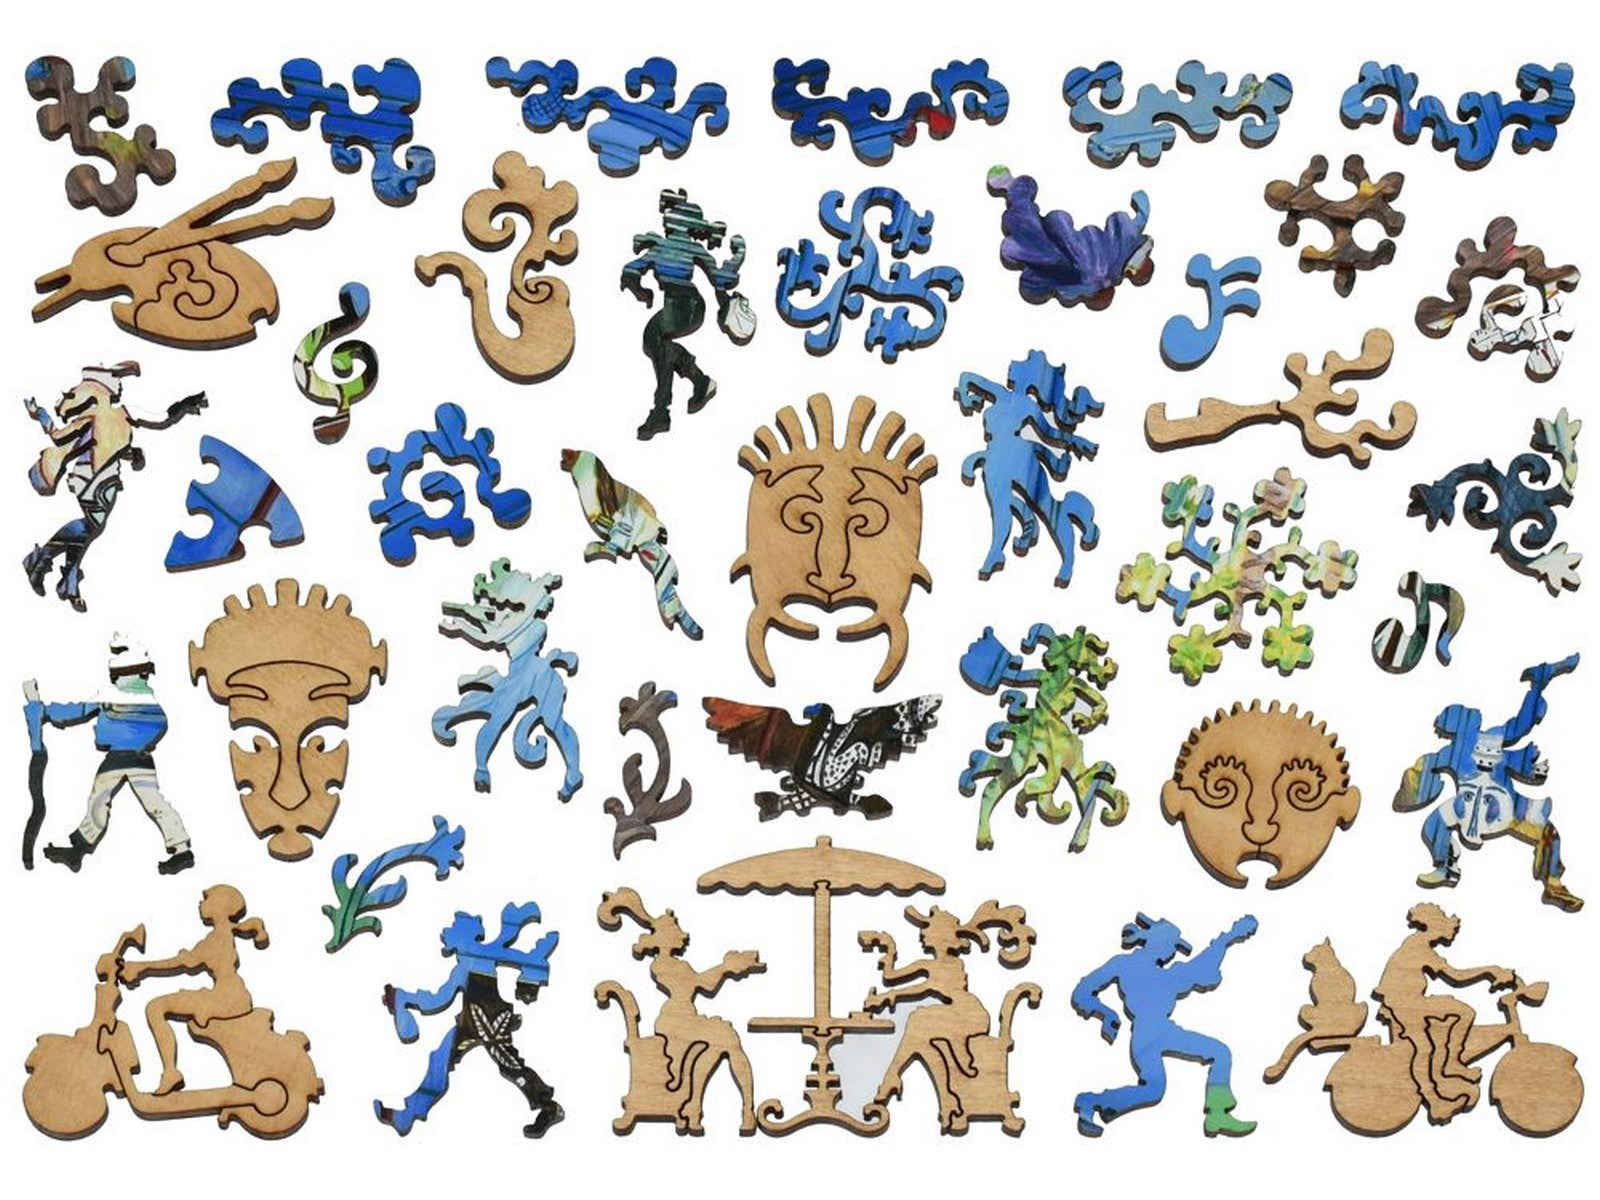 The whimsies that can be found in the puzzle, Picasso's Studio.